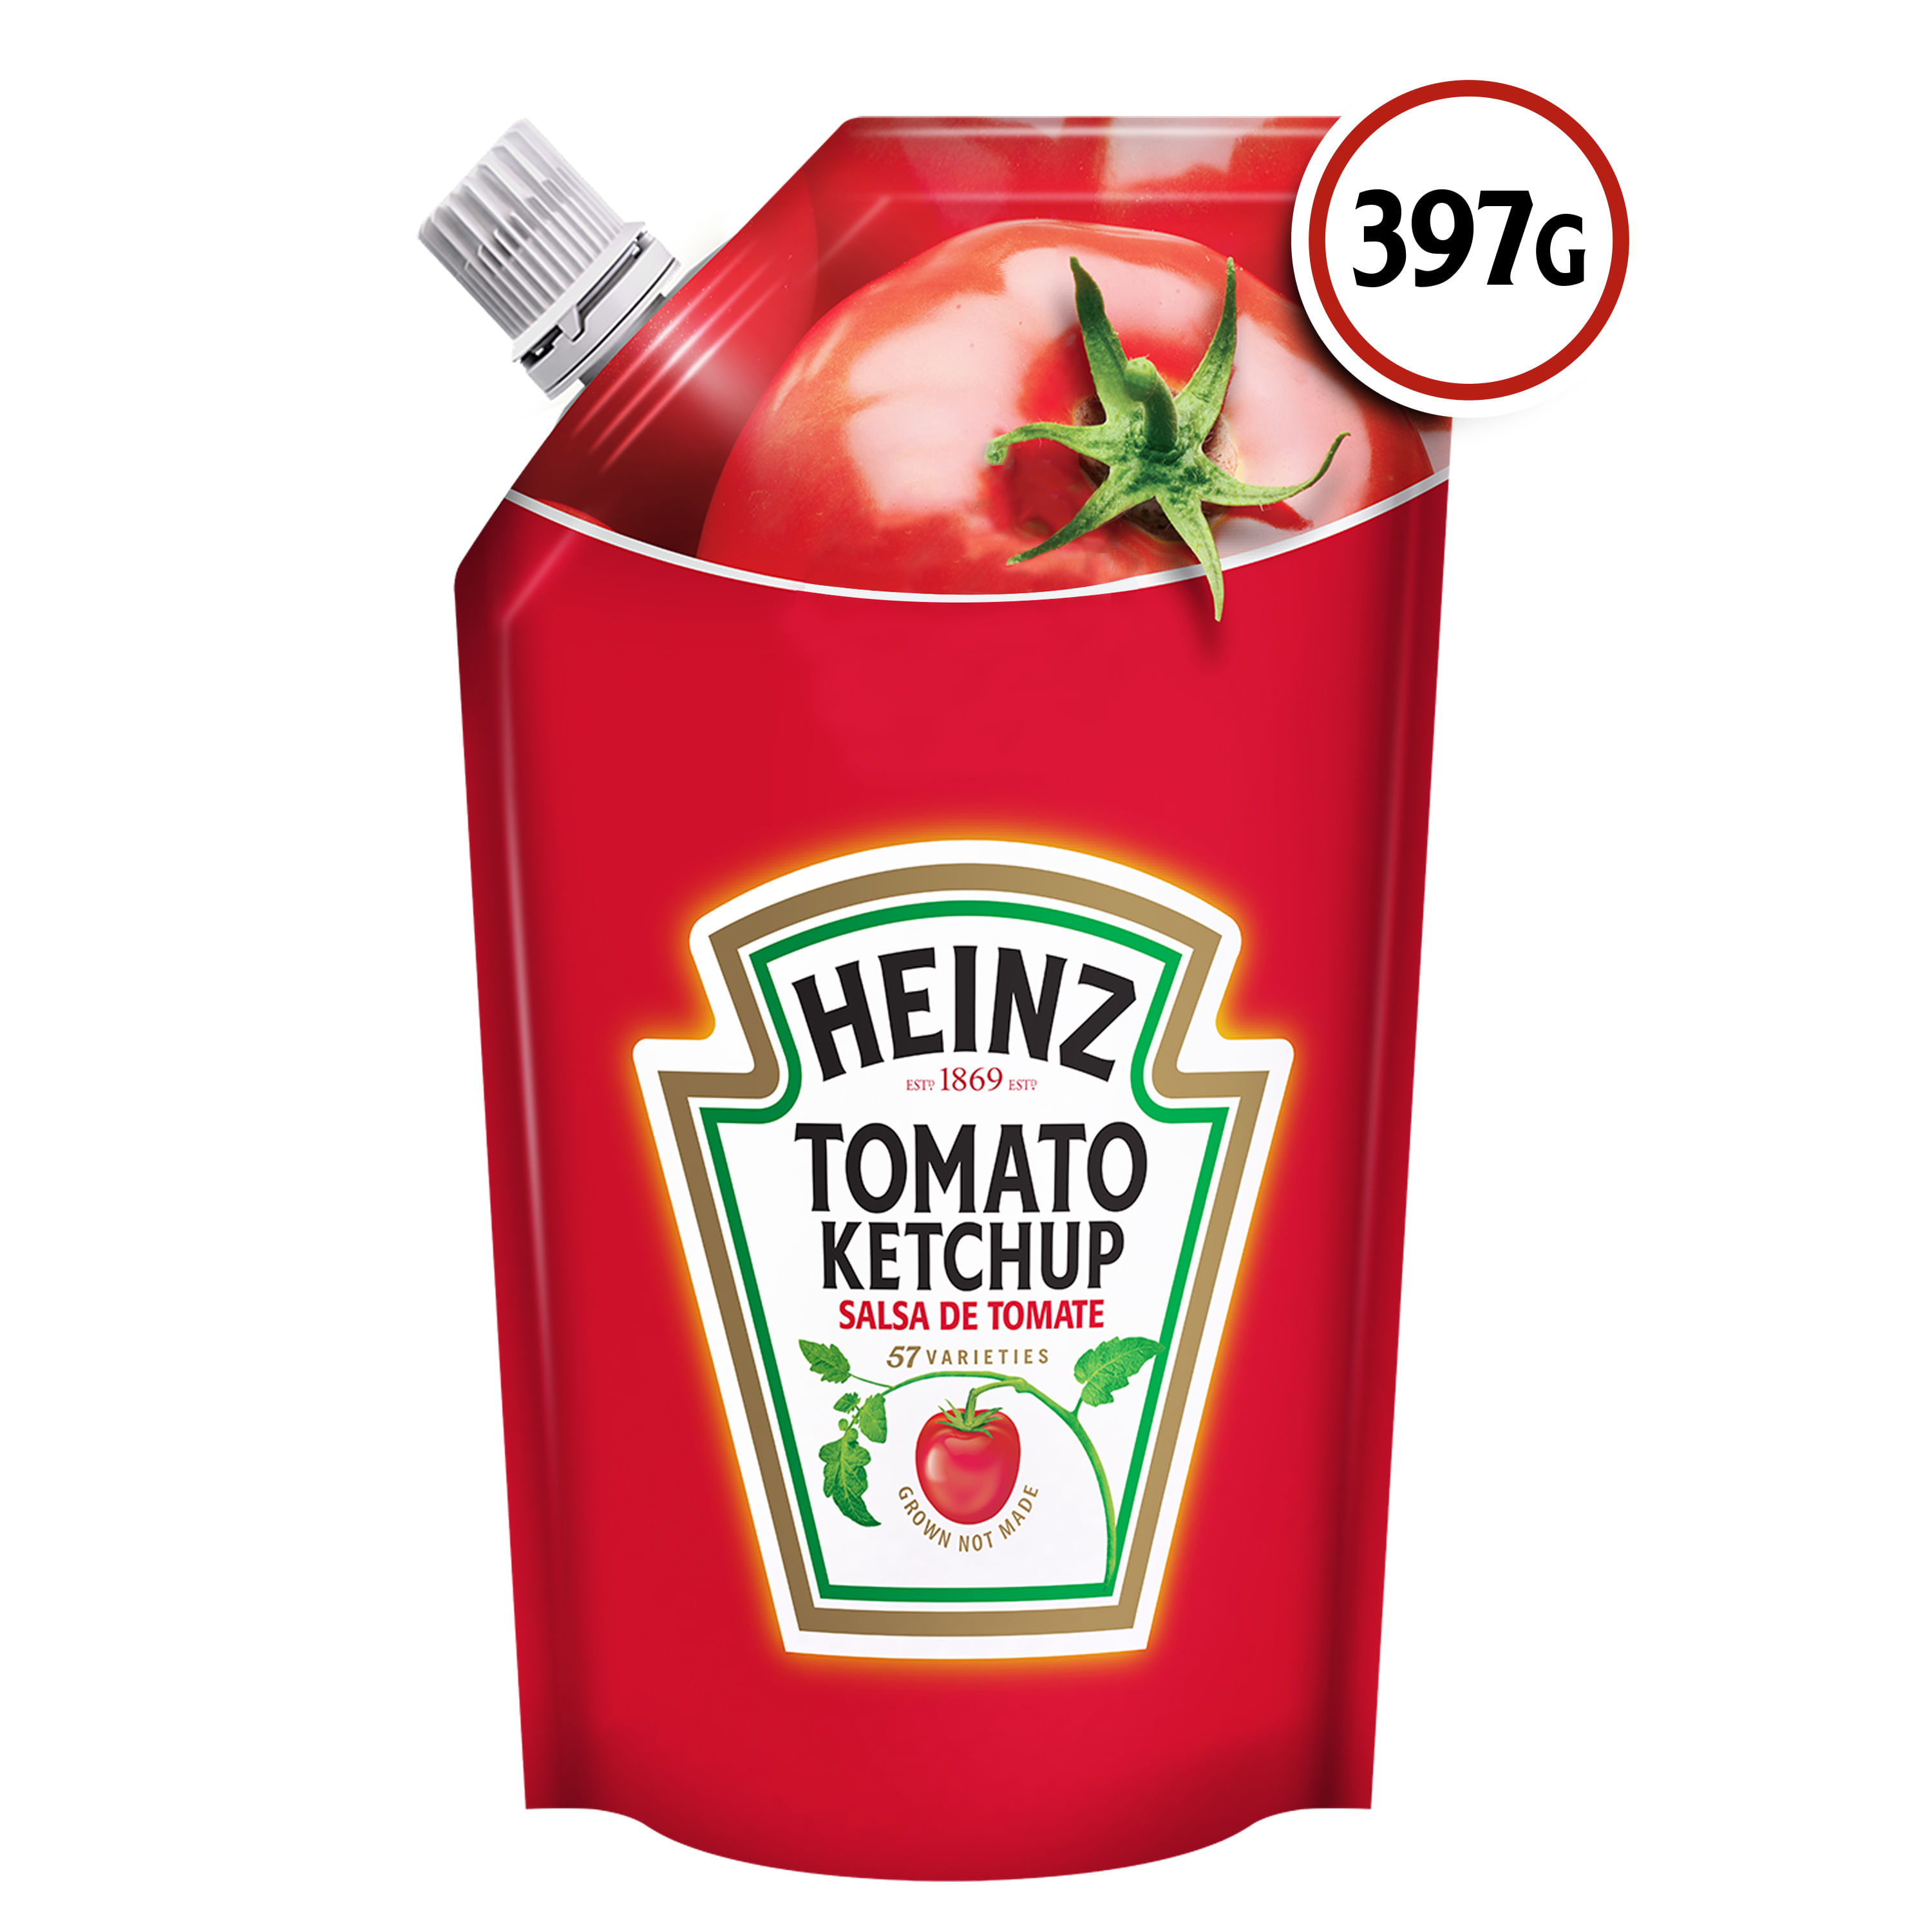 Ketchup-Tomate-Heinz-Doypack-397g-1-29401